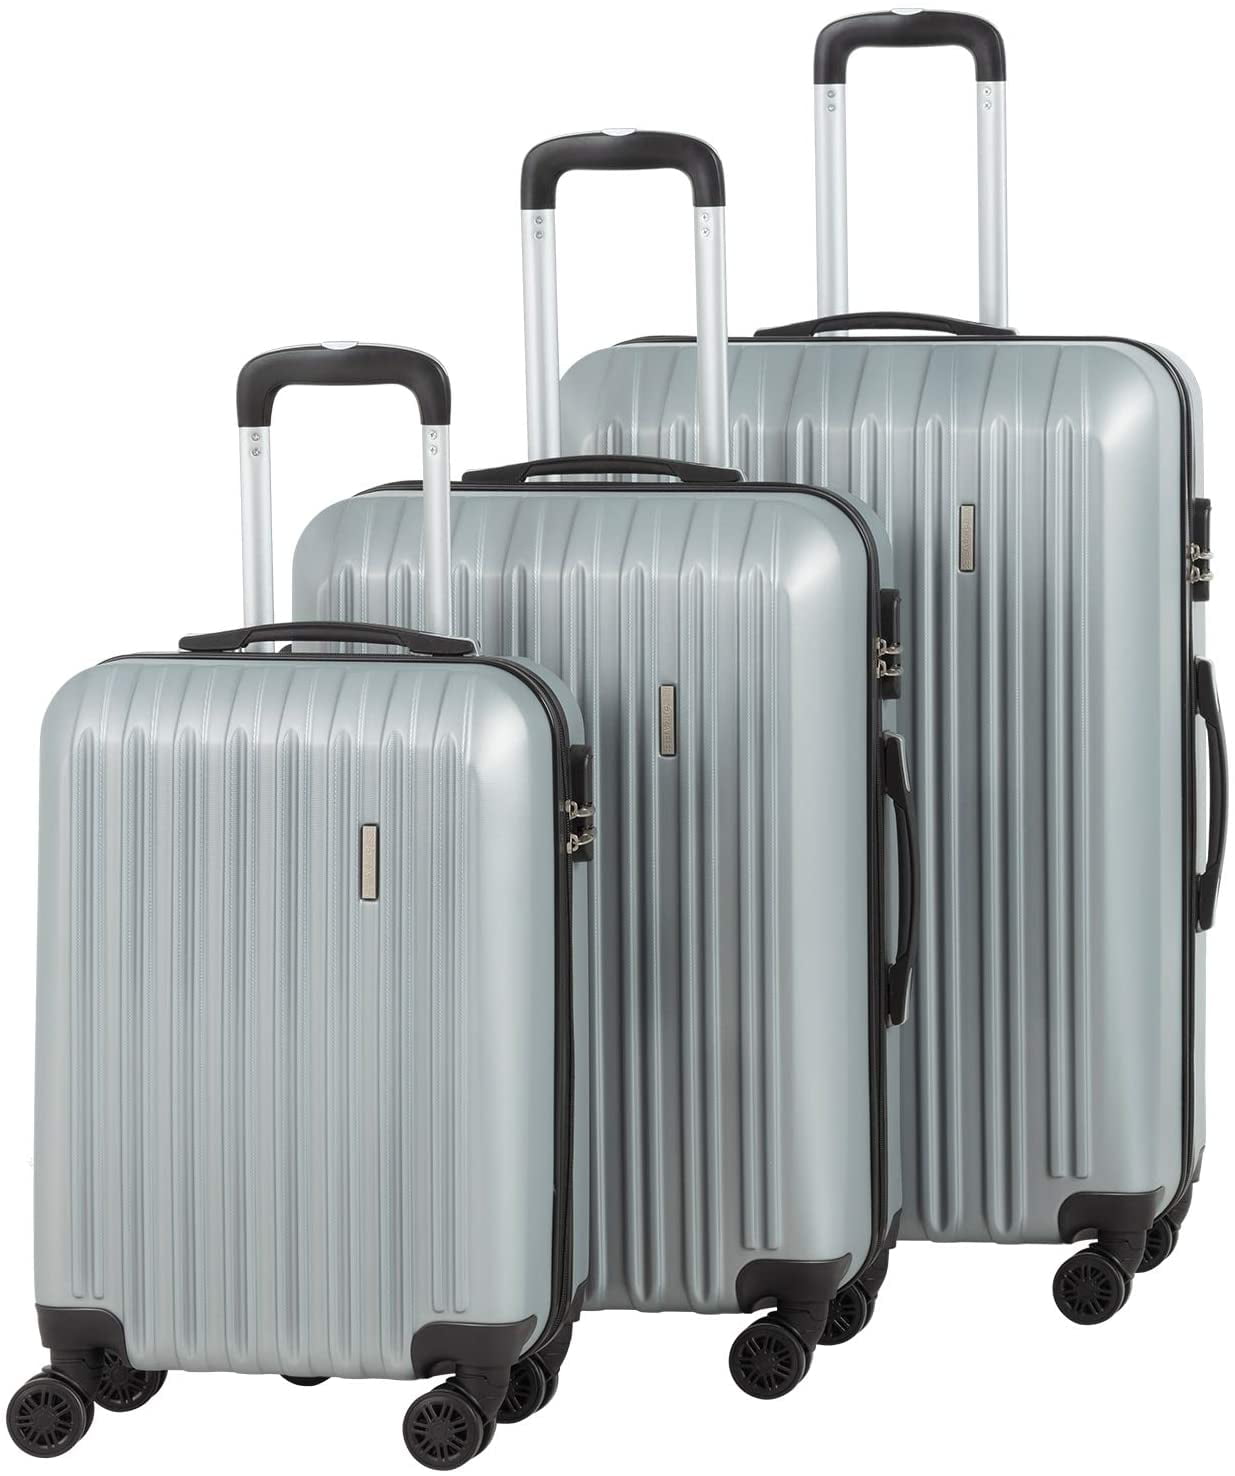 3PCS Silver Murtisol 3 Pieces ABS Luggage Sets Hardside Spinner Lightweight Durable Spinner Suitcase 20 24 28 